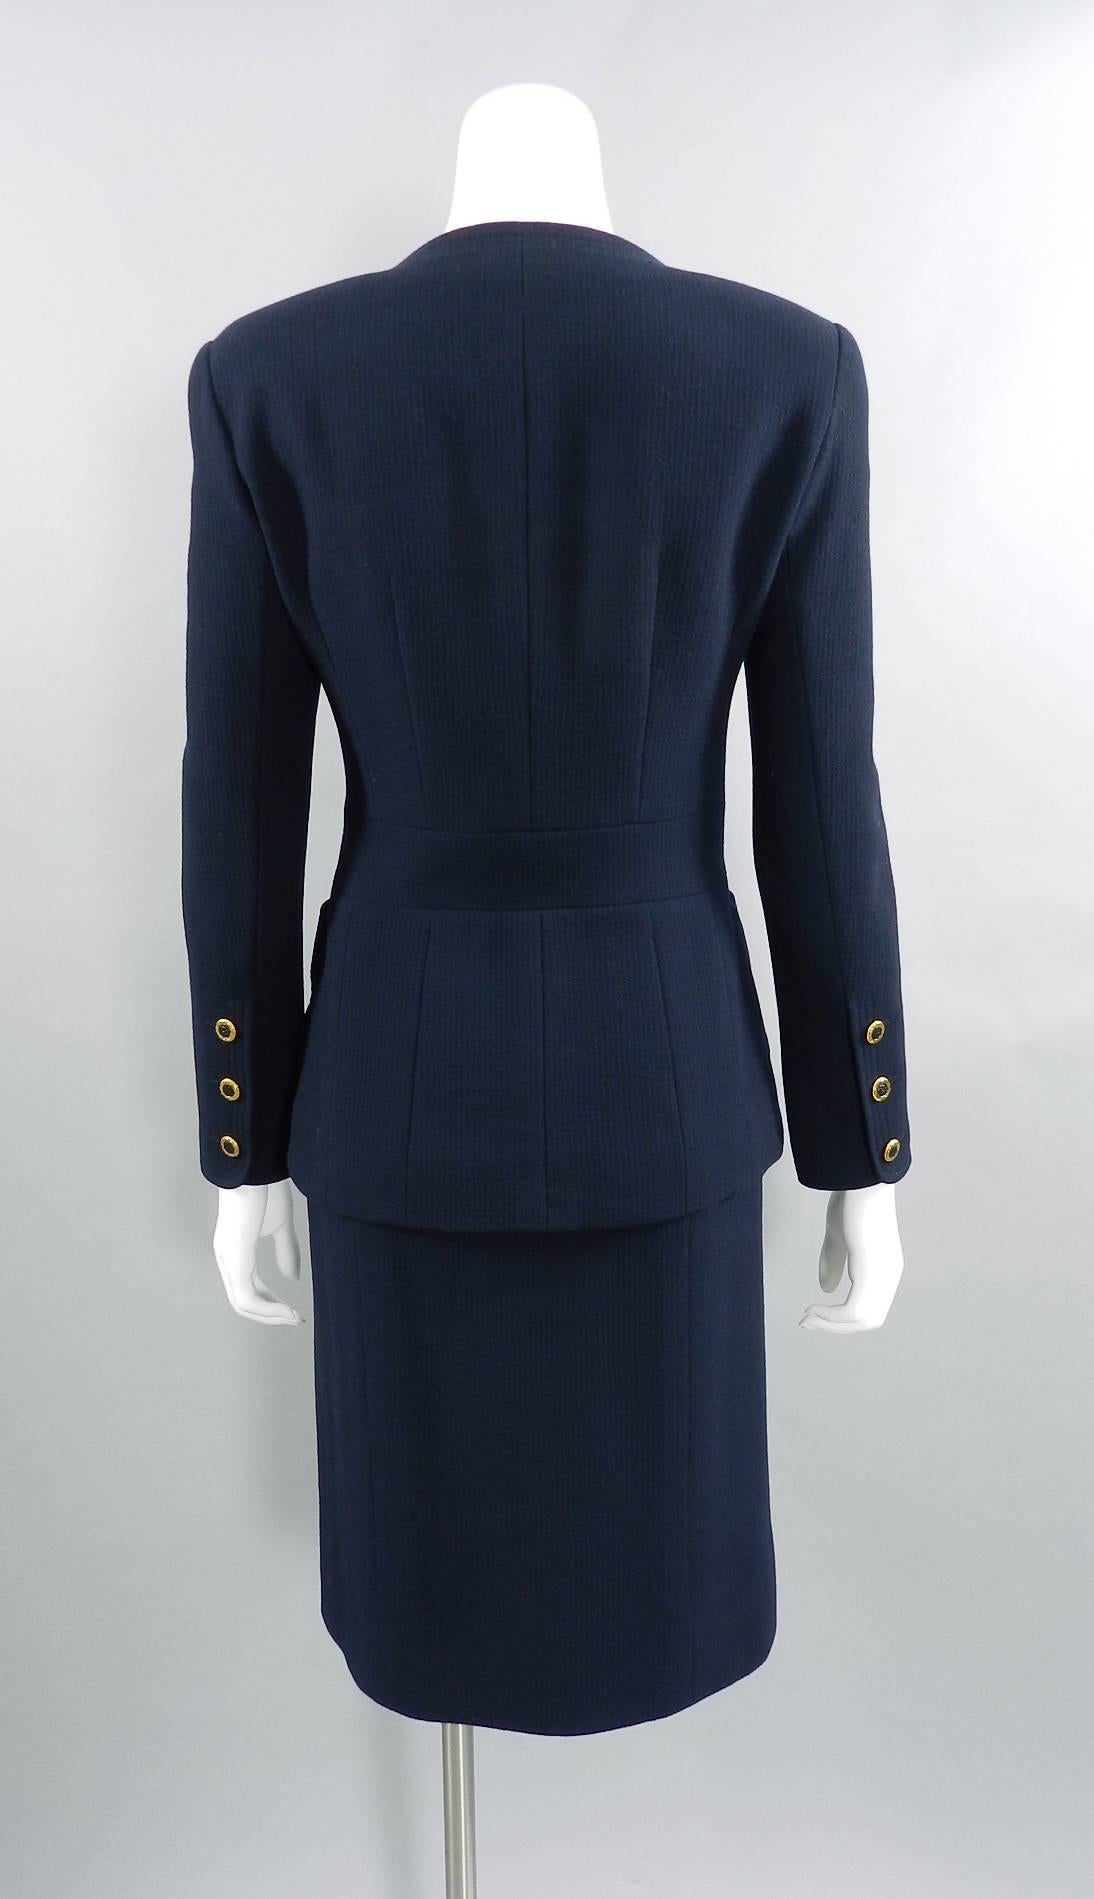 Women's Chanel Vintage 1990's Navy Wool Skirt Suit with Gold Buttons